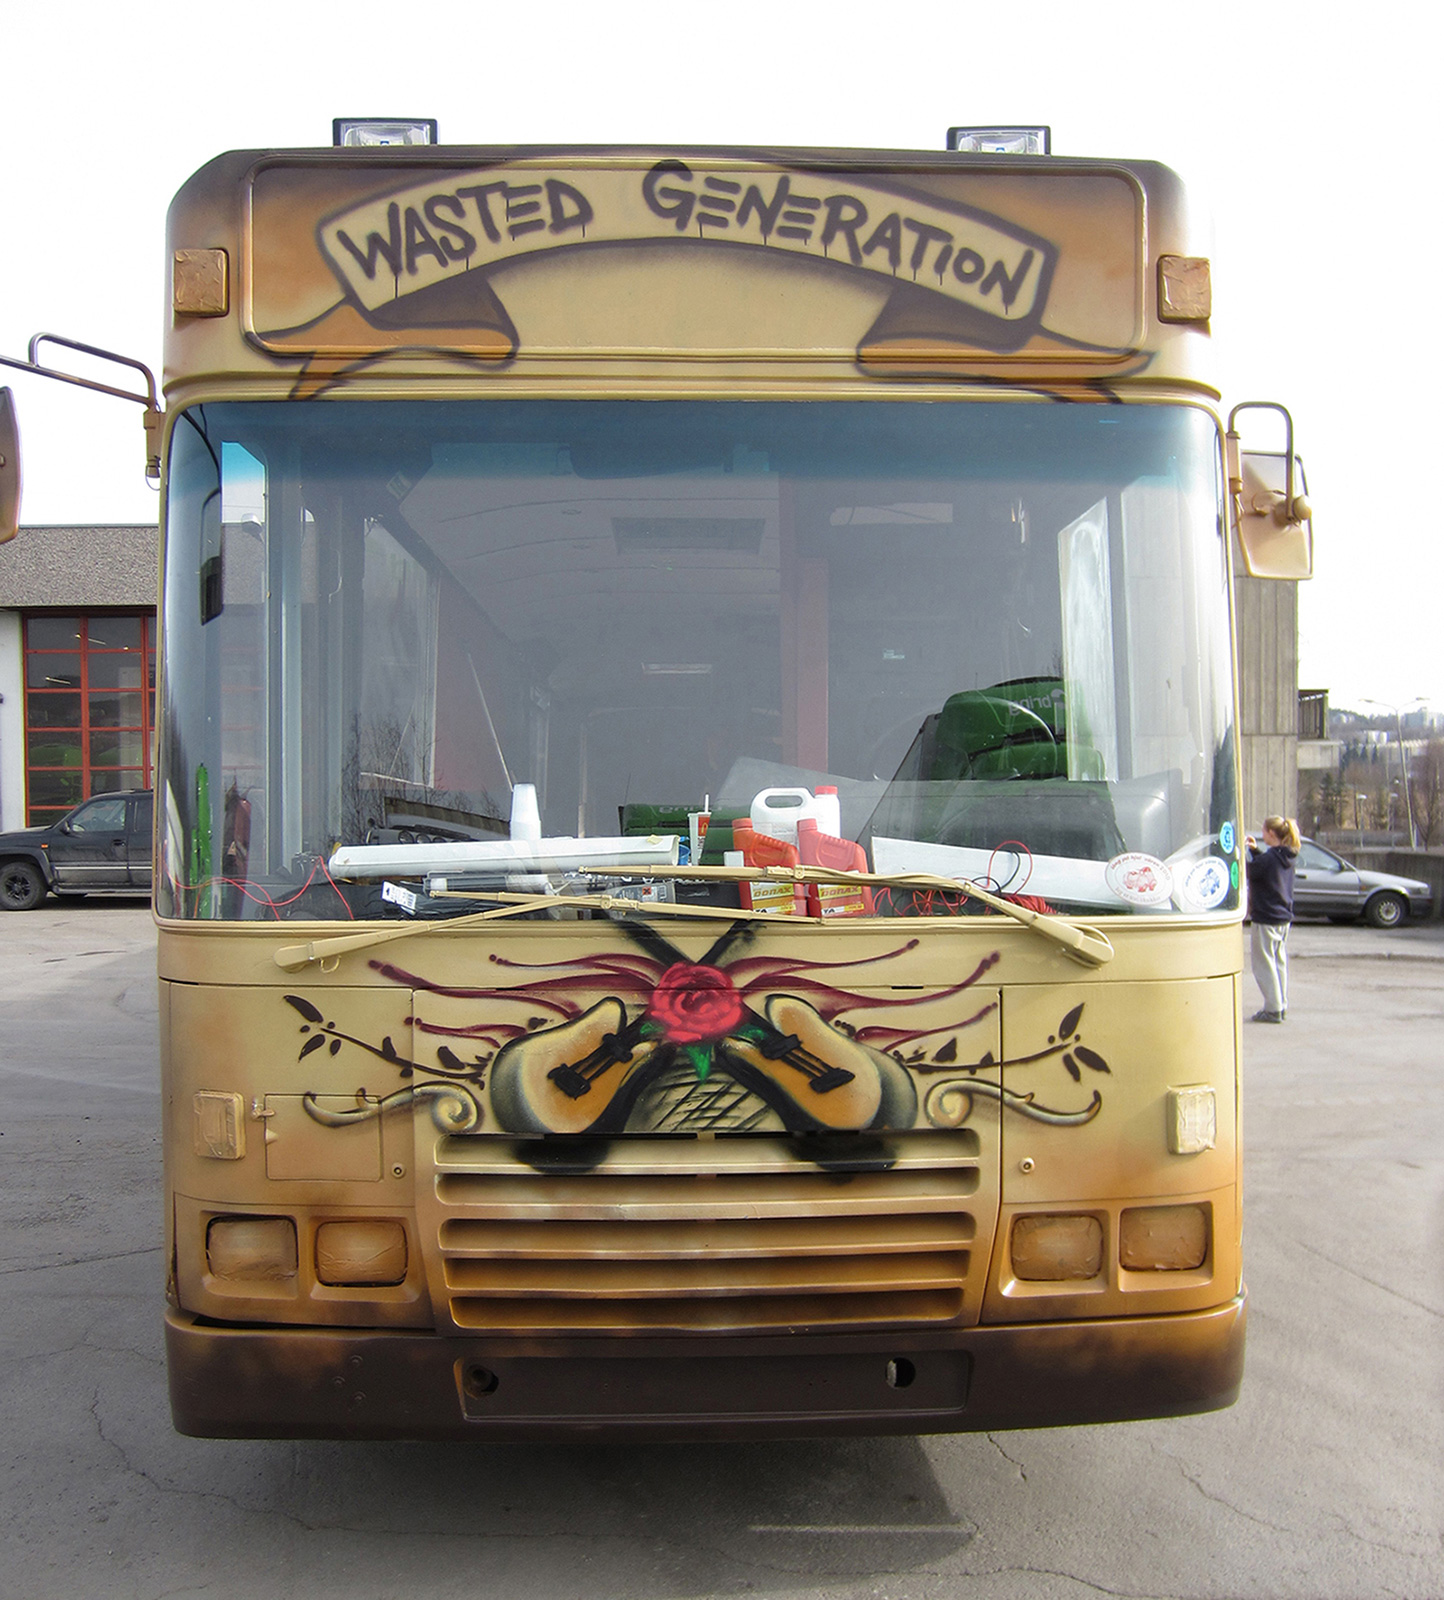 Wasted Generation rustic bus exterior designed graffiti style